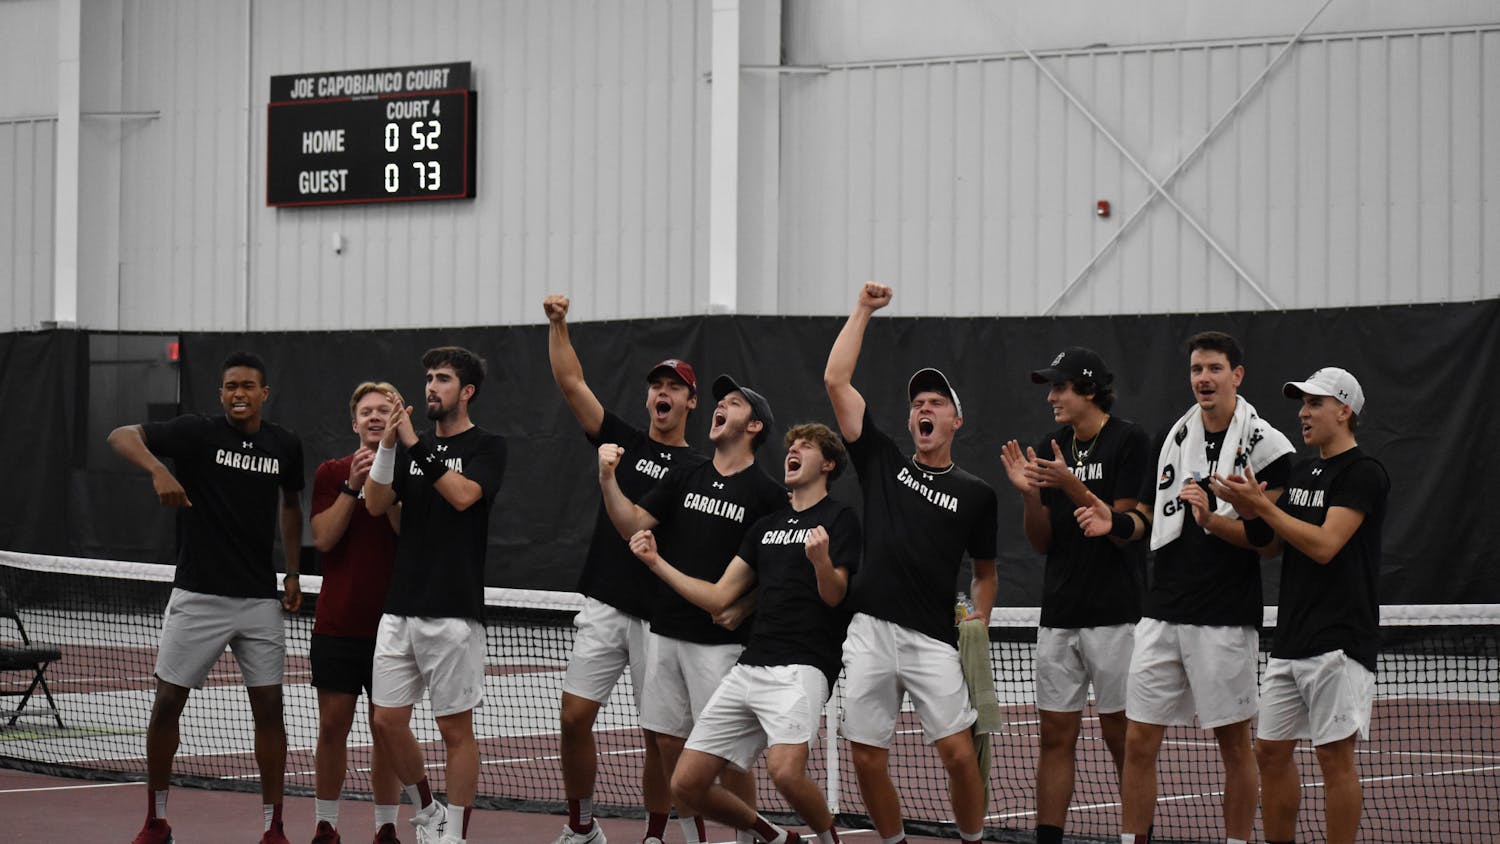 South Carolina’s men’s tennis team celebrate together after winning the ITA Kickoff Weekend event at the Carolina Indoor Tennis Center on Jan. 29, 2023. The South Carolina Gamecocks beat N.C. State 4-0.&nbsp;